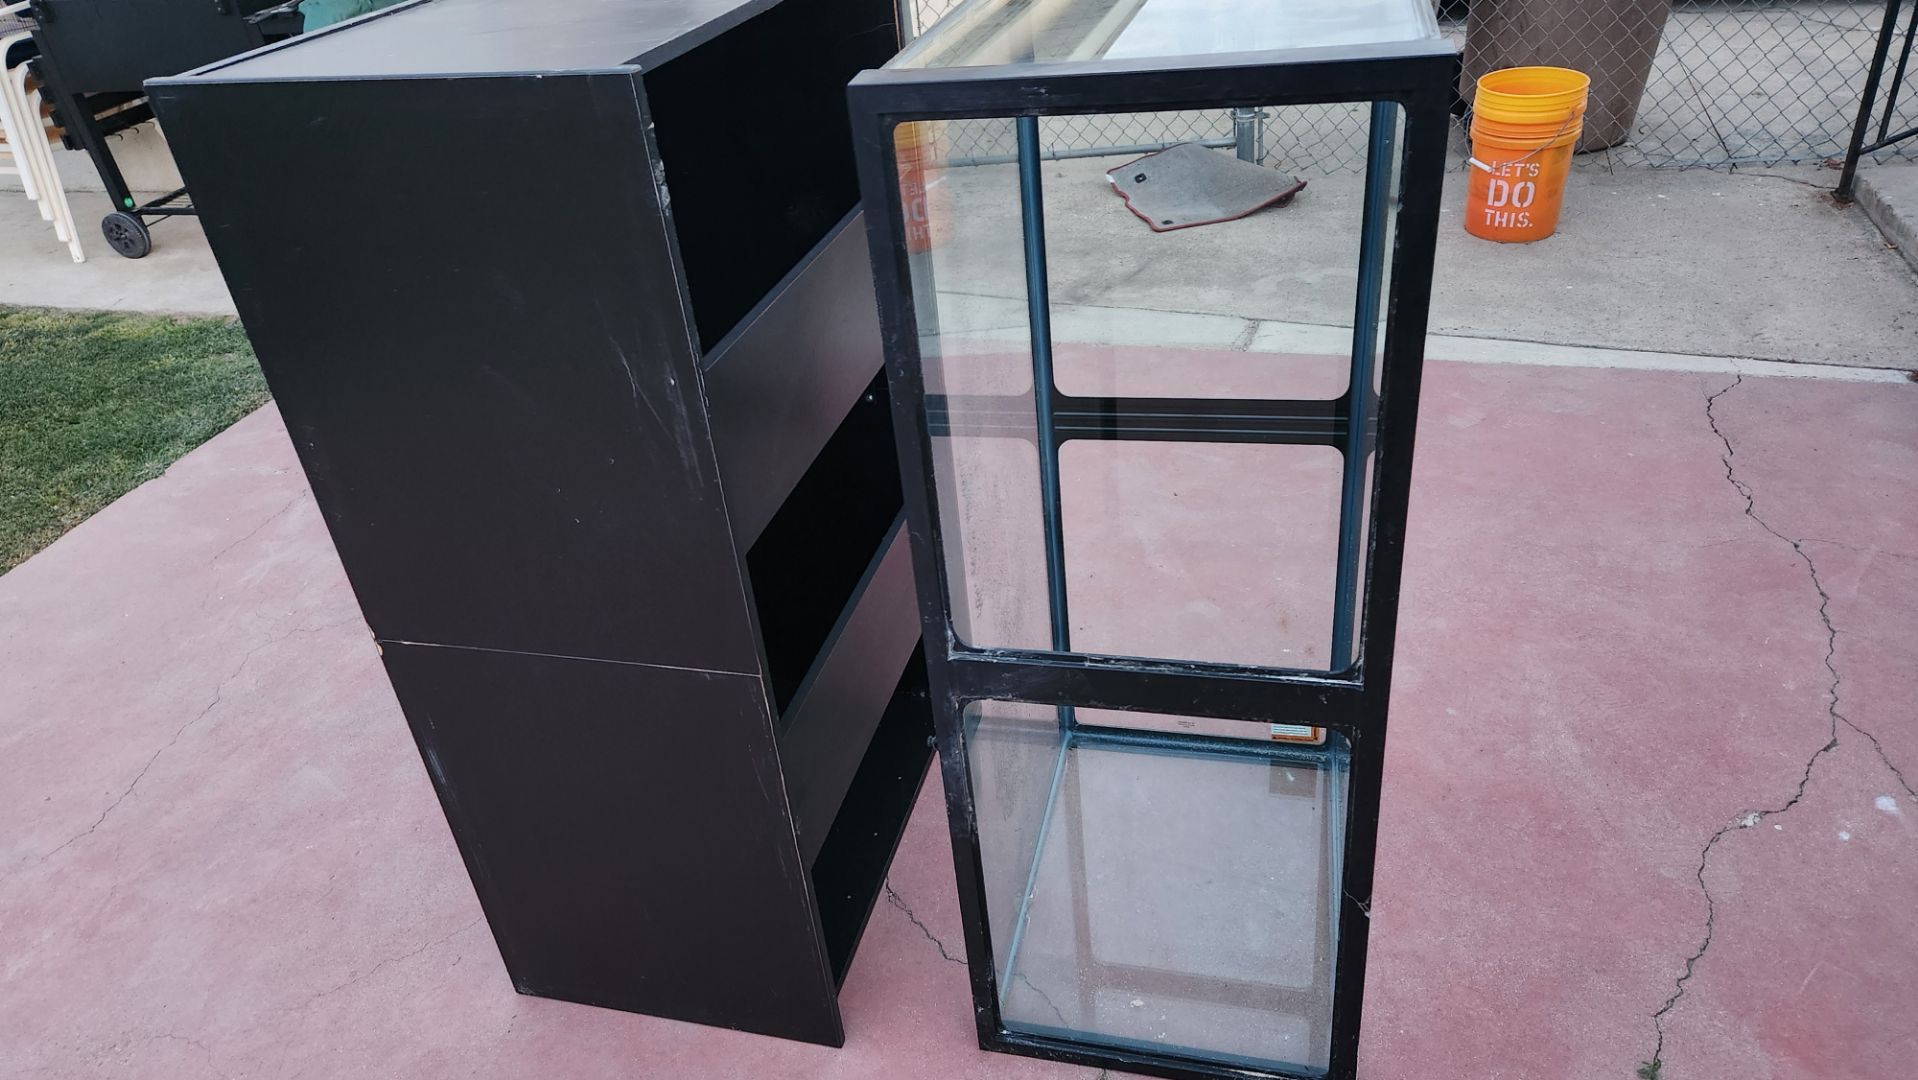 90 Gallon Fish Tank With Stand 